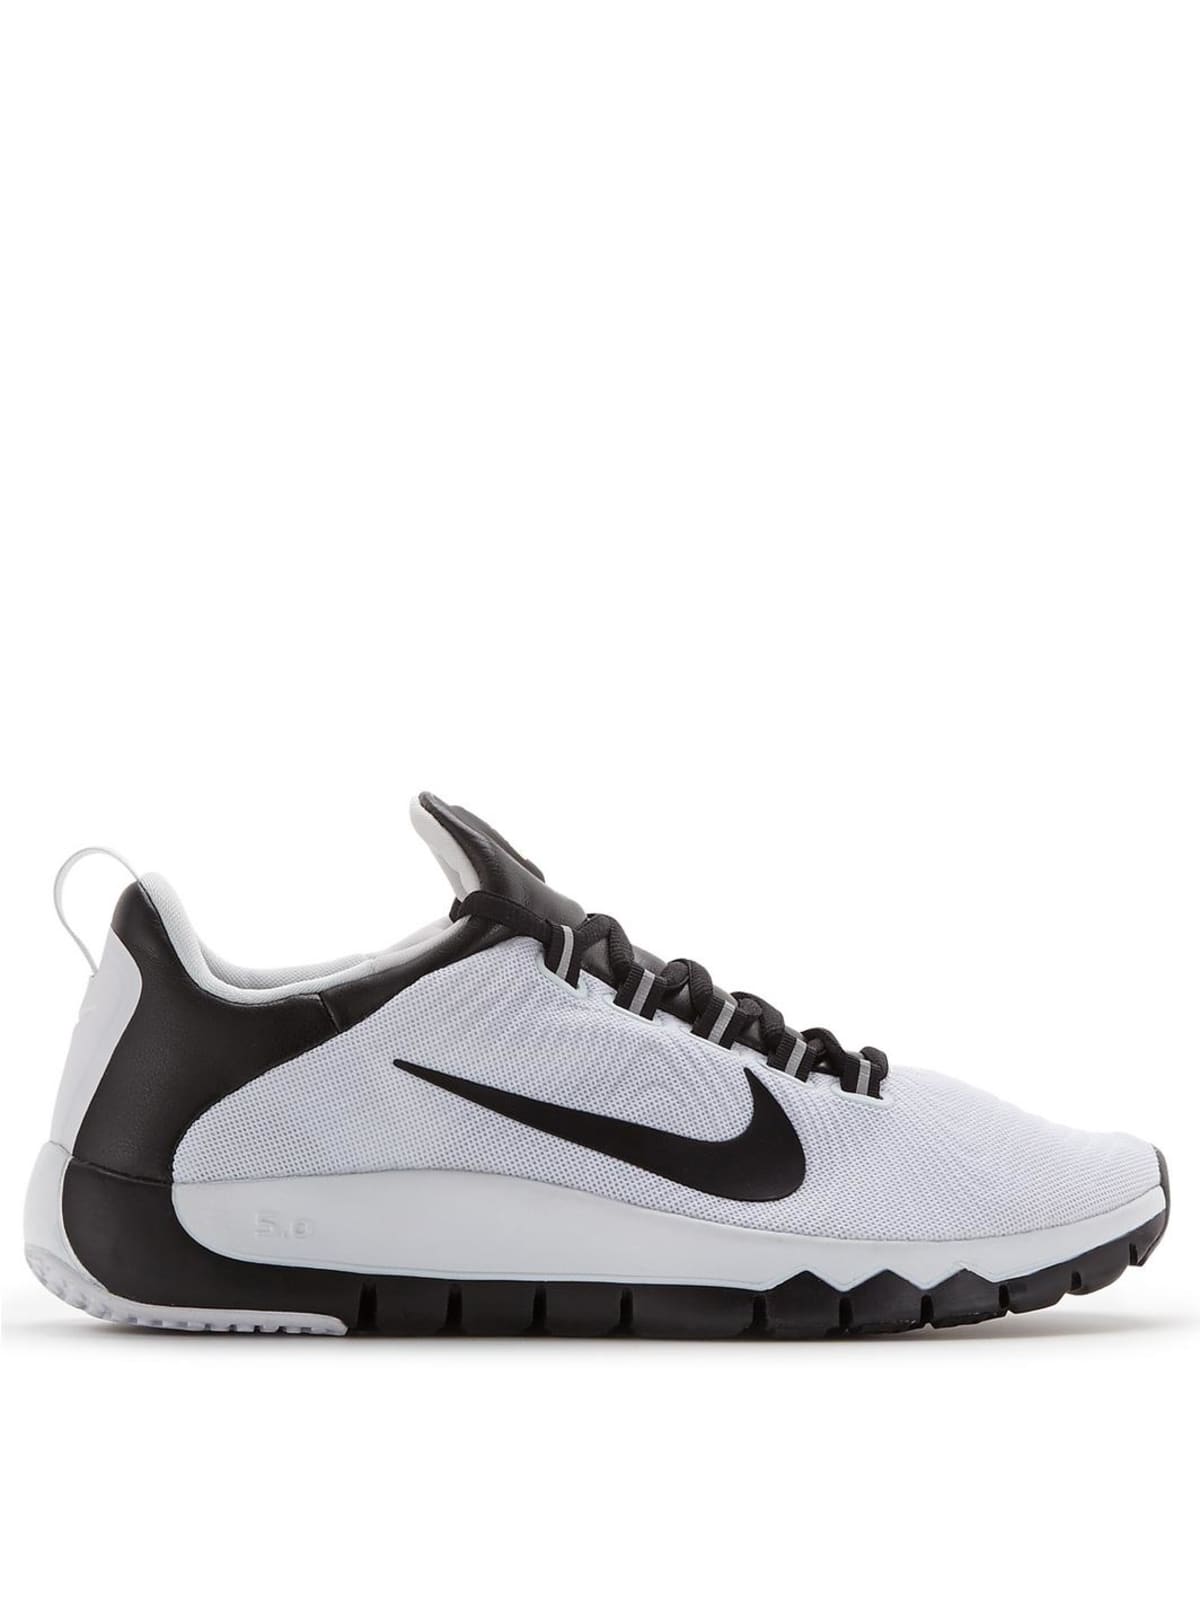 Nike Free Trainer 5.0 V5 | Nike | Sole Collector